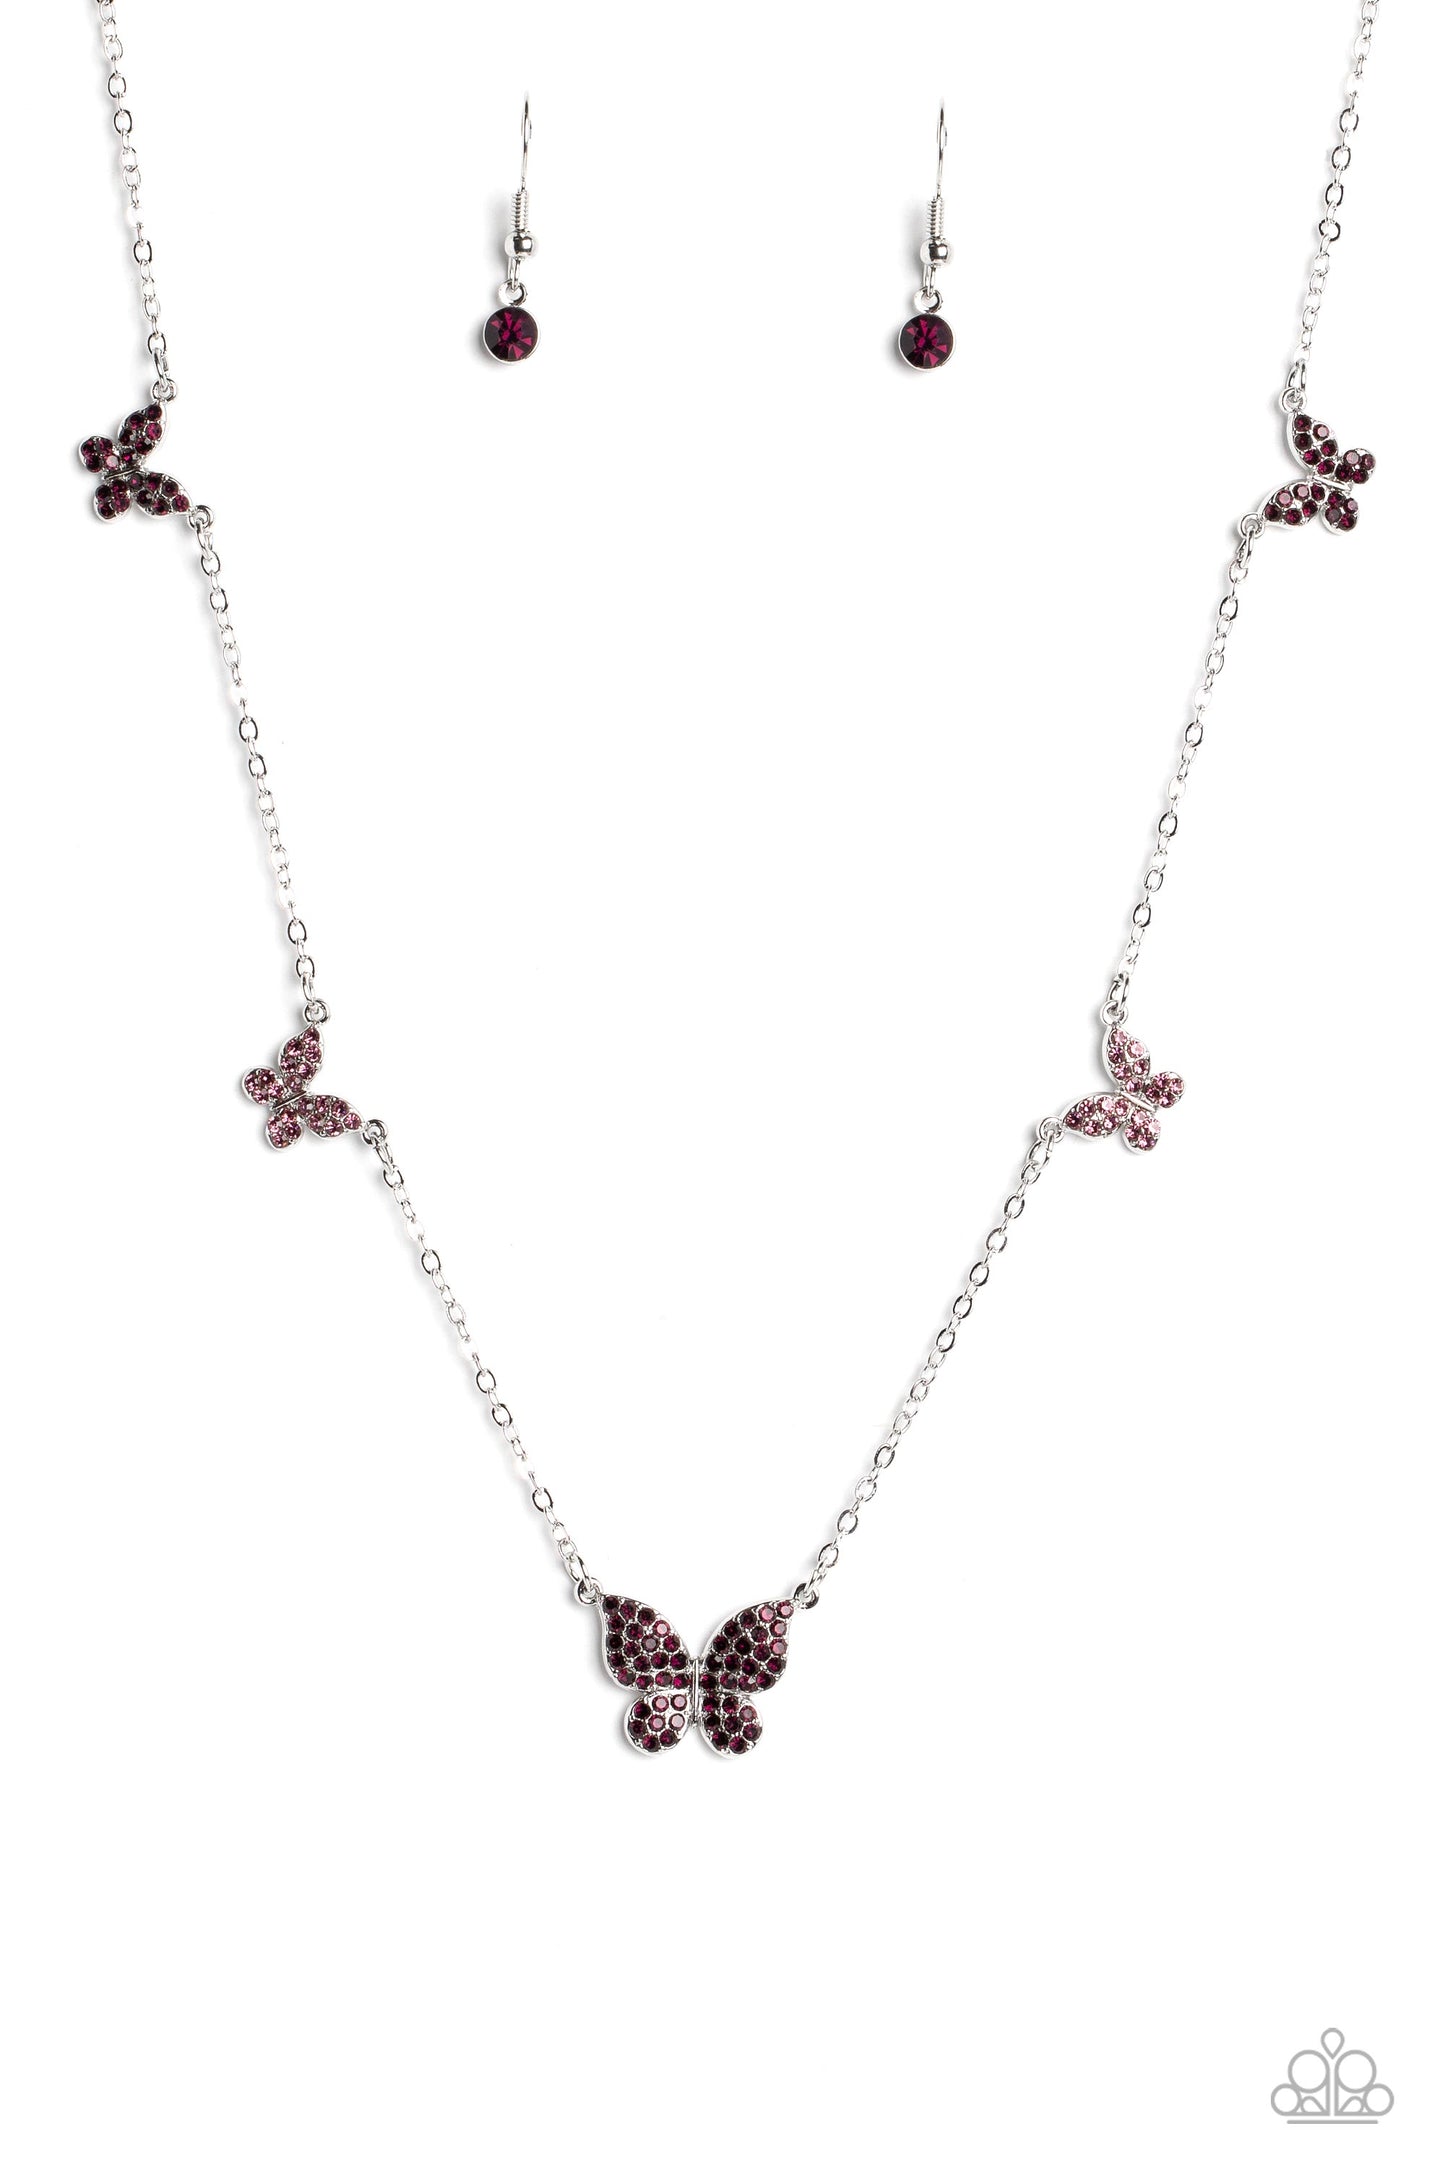 FAIRY Special - Purple Rhinestone Silver Butterfly Short Necklace